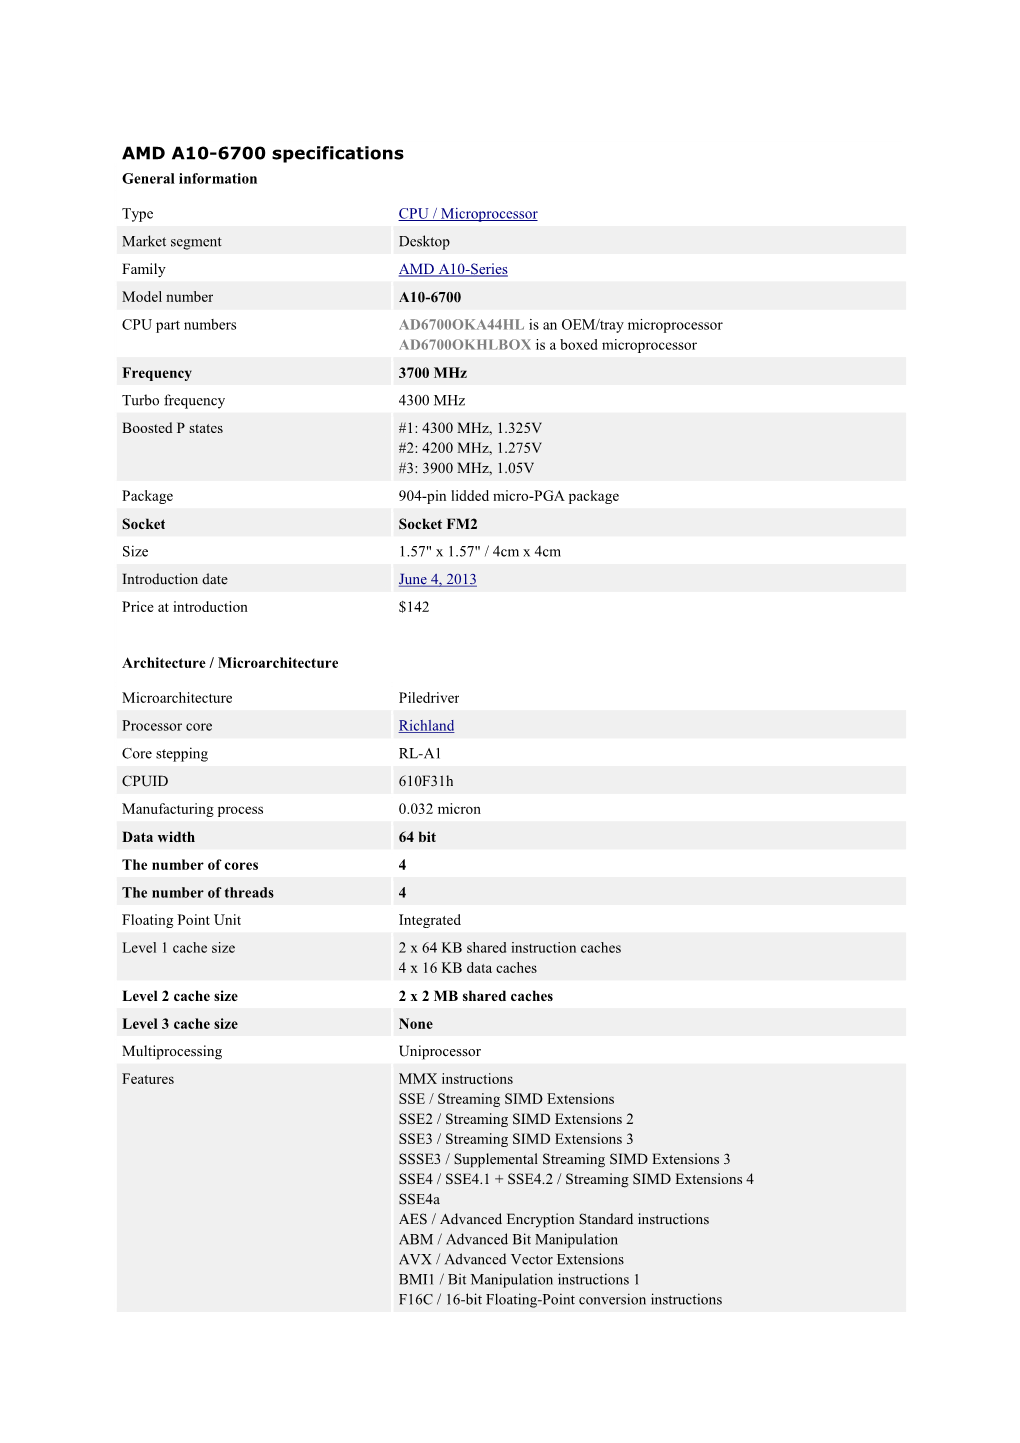 AMD A10-6700 Specifications General Information